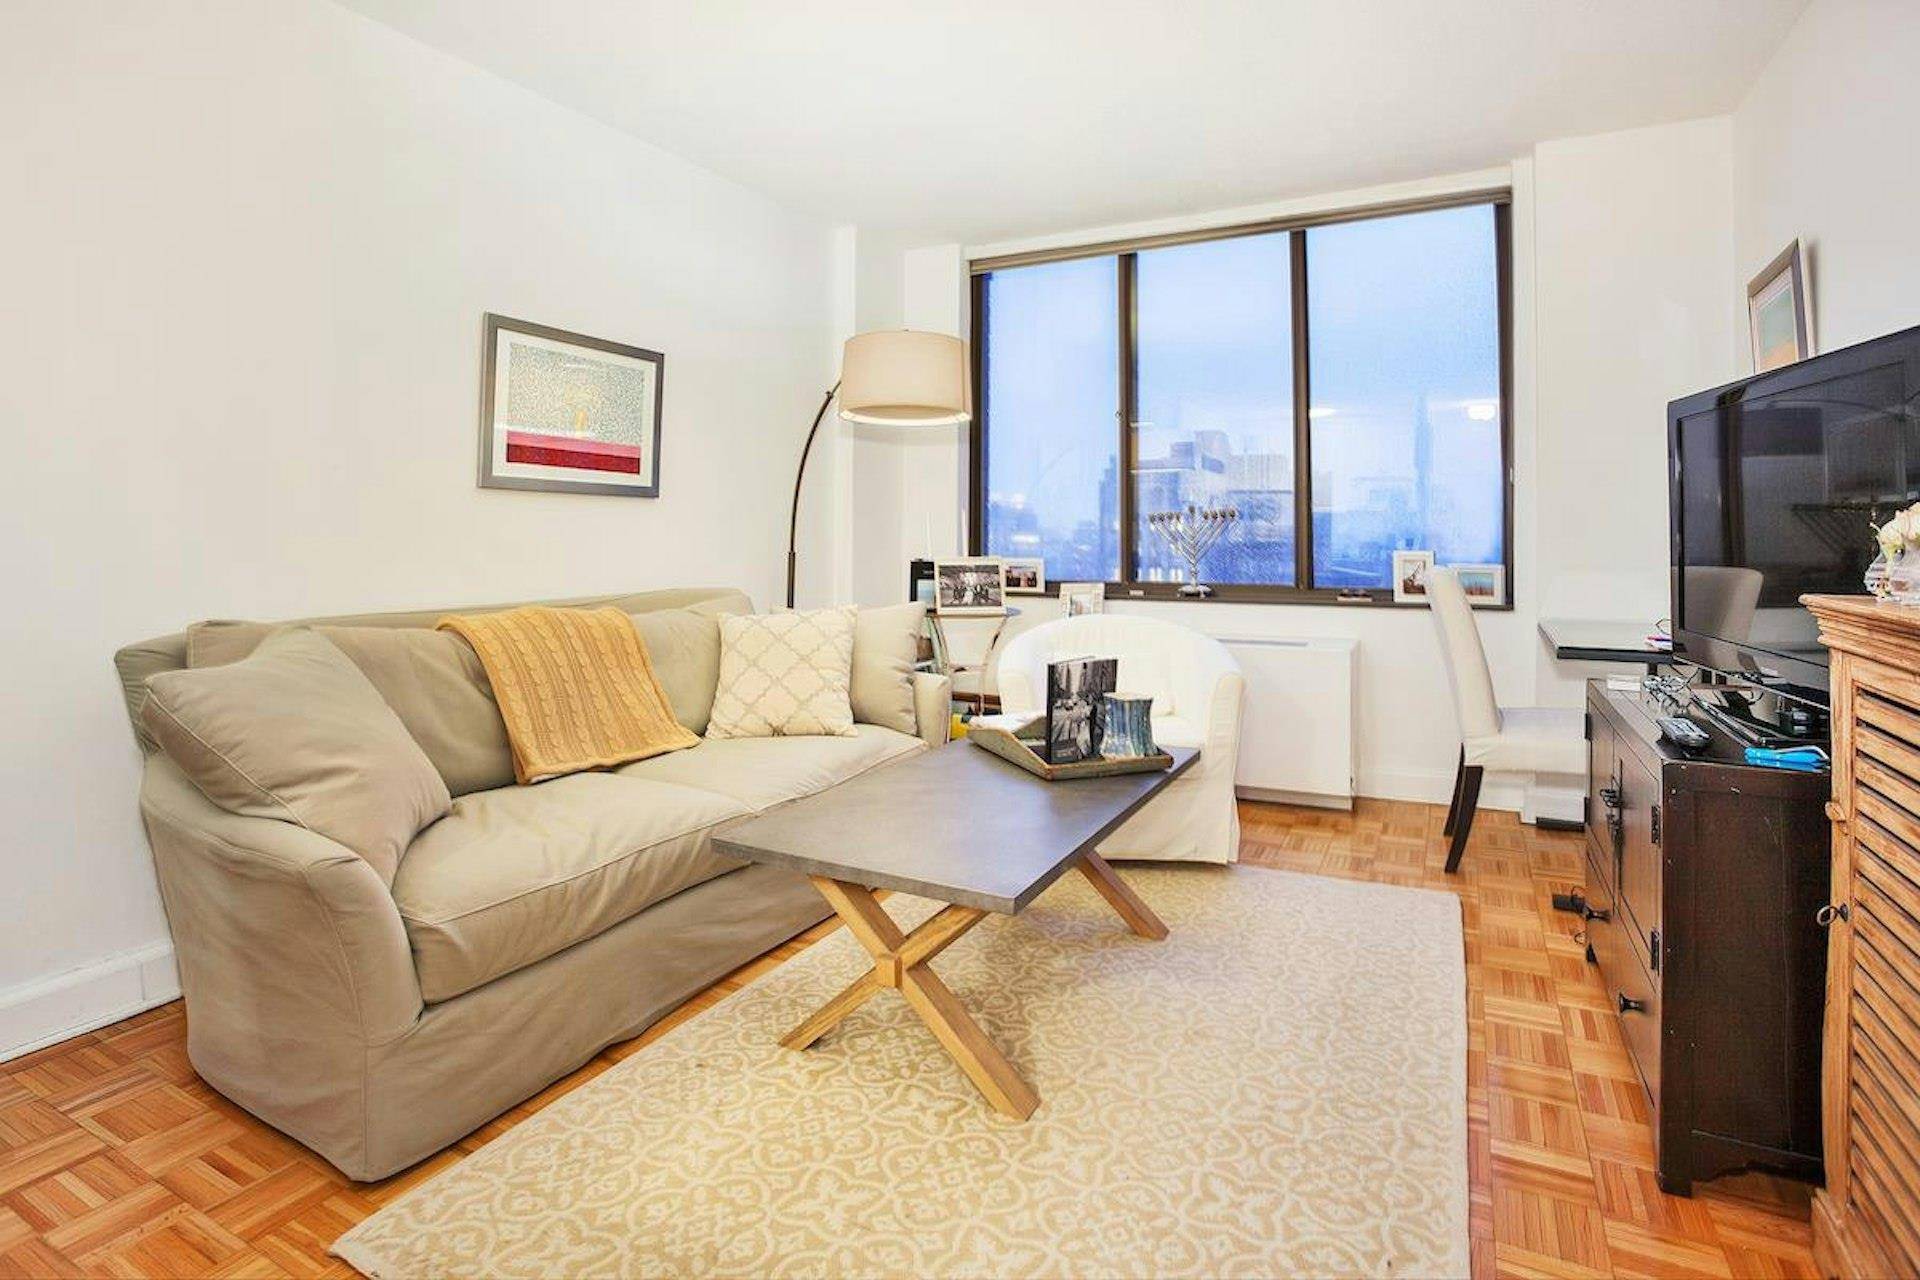 Make your new home in the amazing Flat Iron location next to Madison Square Park, the iconic Flatiron building and Fifth Avenue shopping !